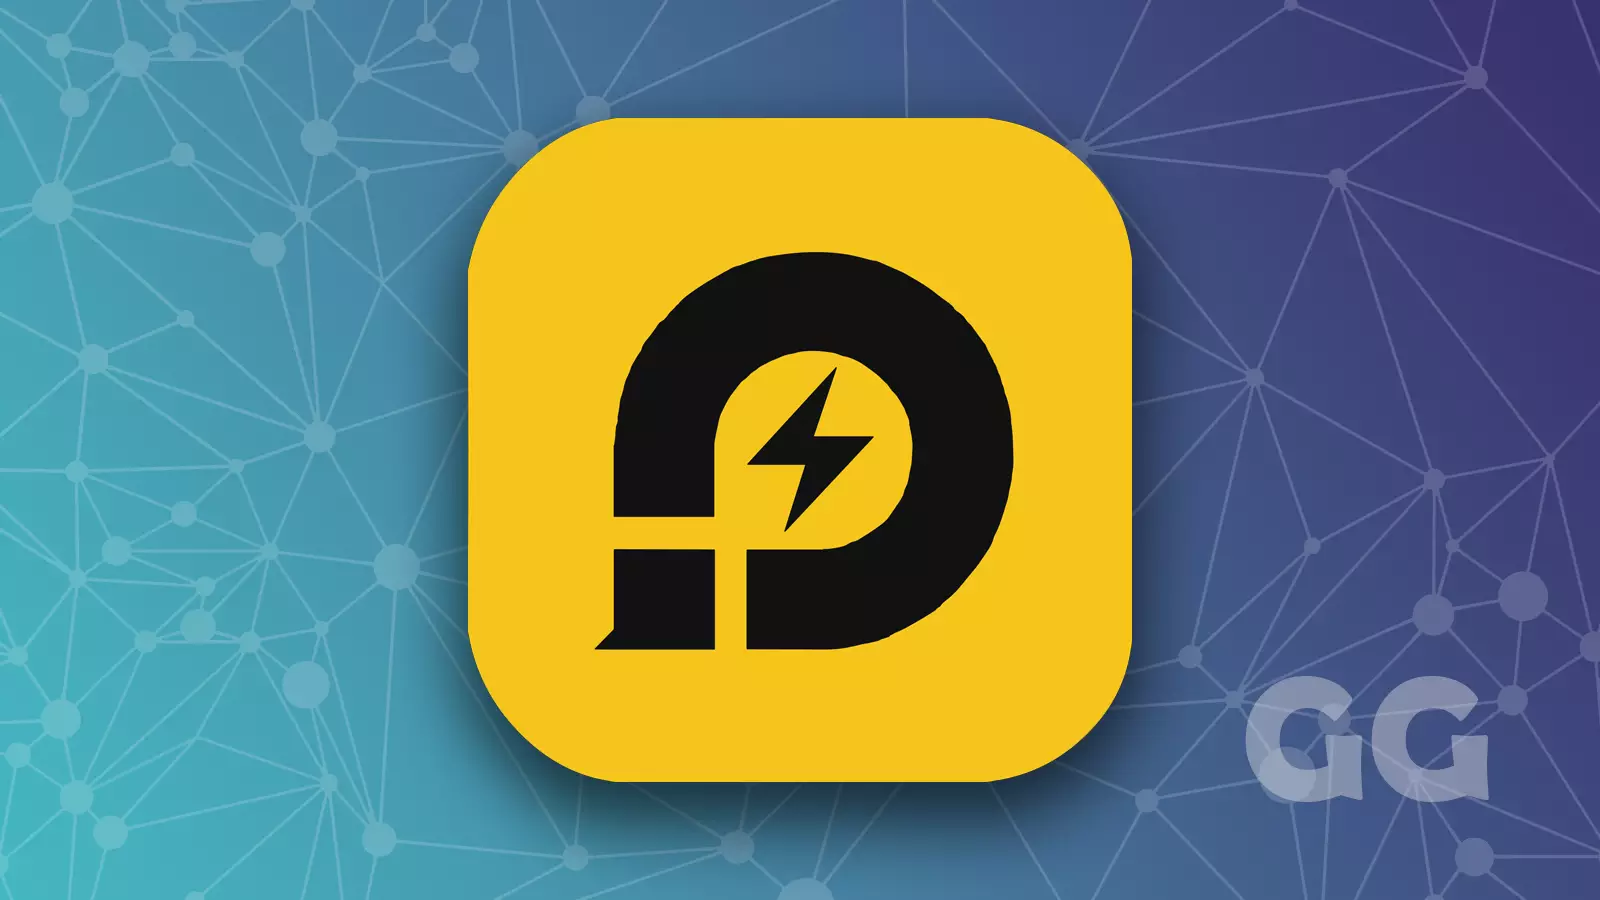 ldplayer yellow and black logo on blue background